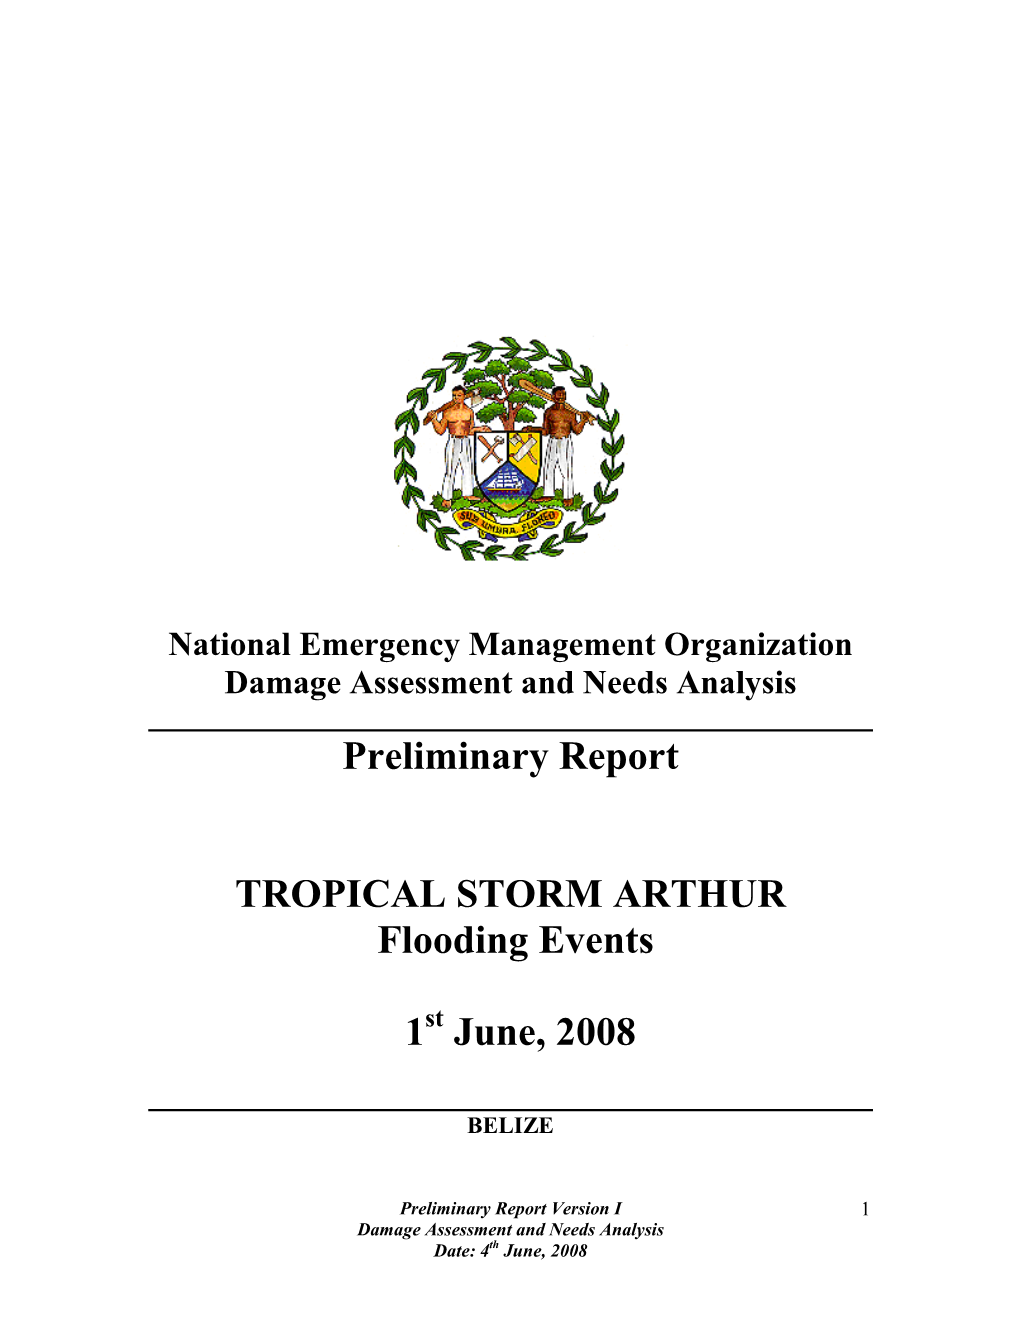 Preliminary Report on the Effect of Hurricane Dean